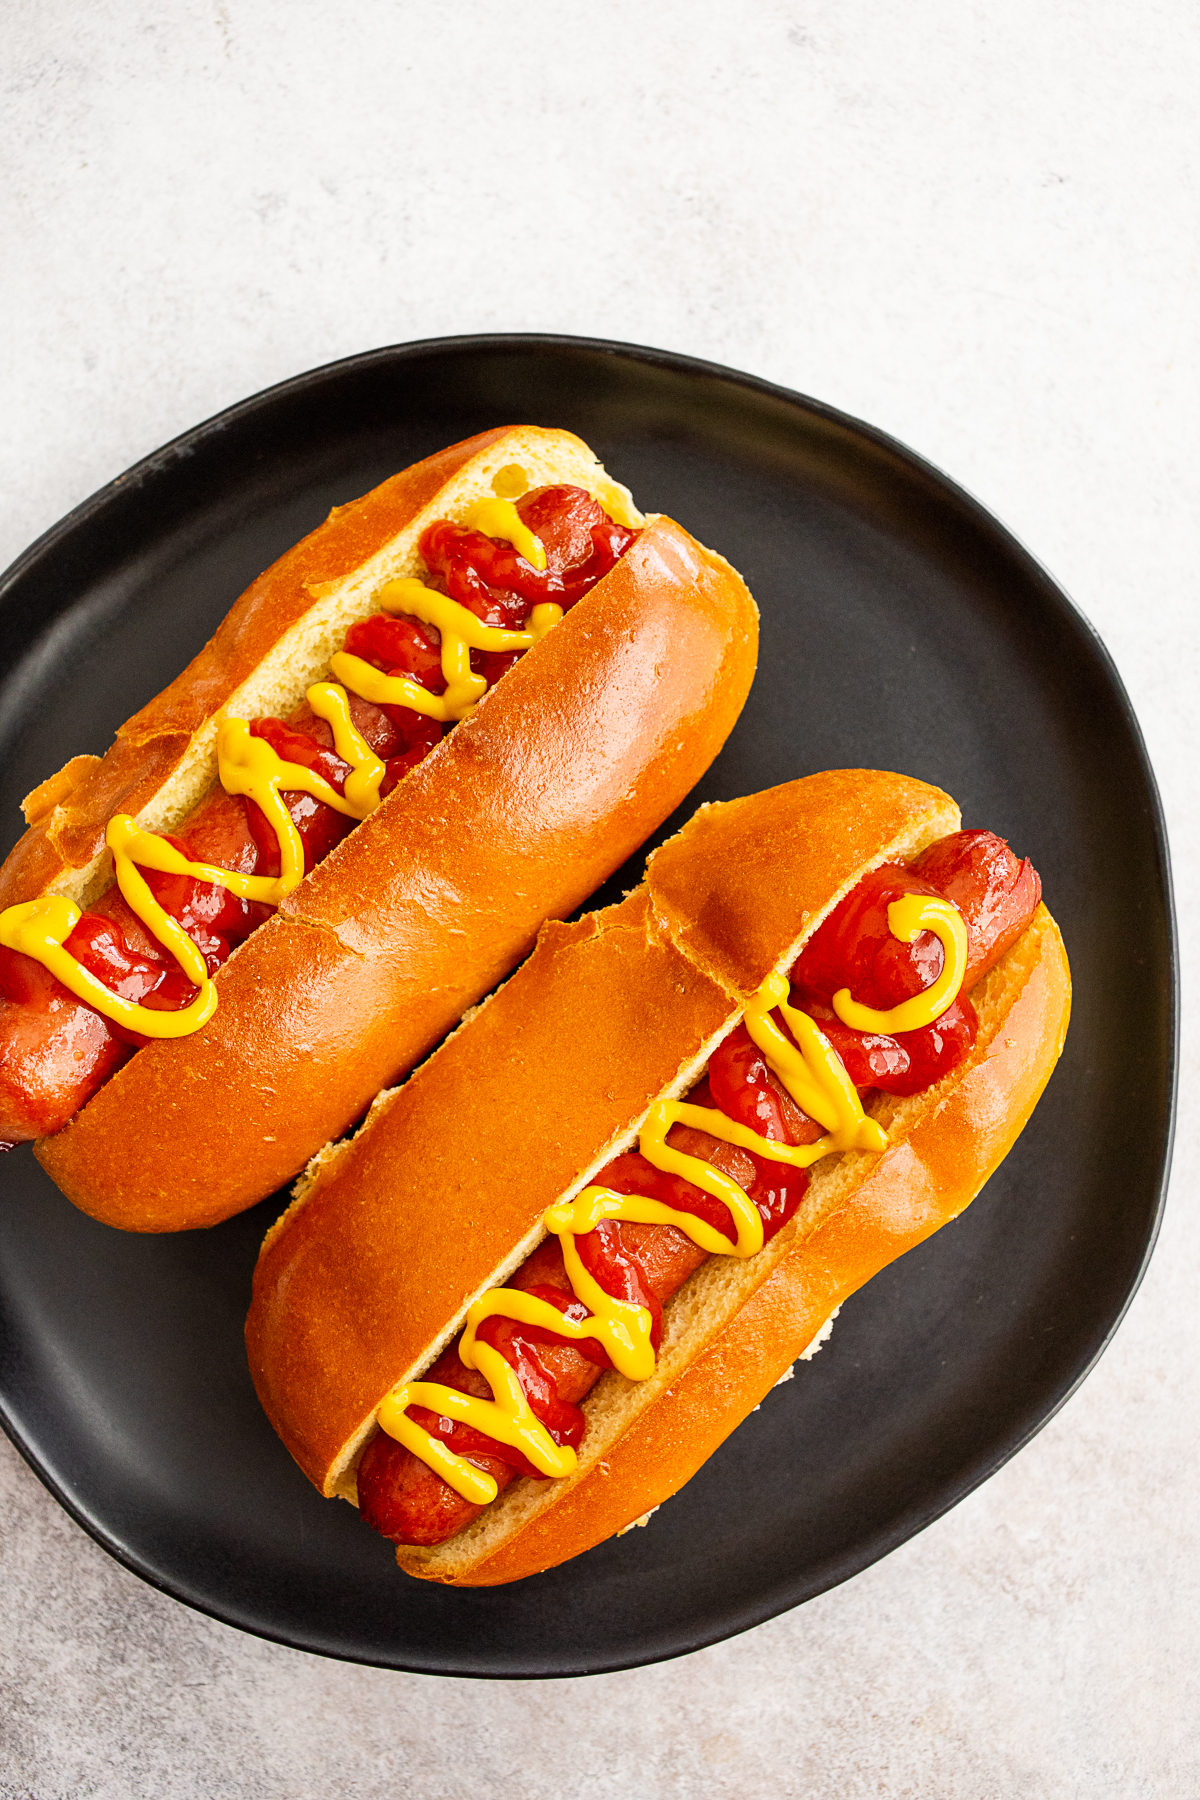 2 air fryer cooked hot dogs sitting on a plate with mustard and ketchup.